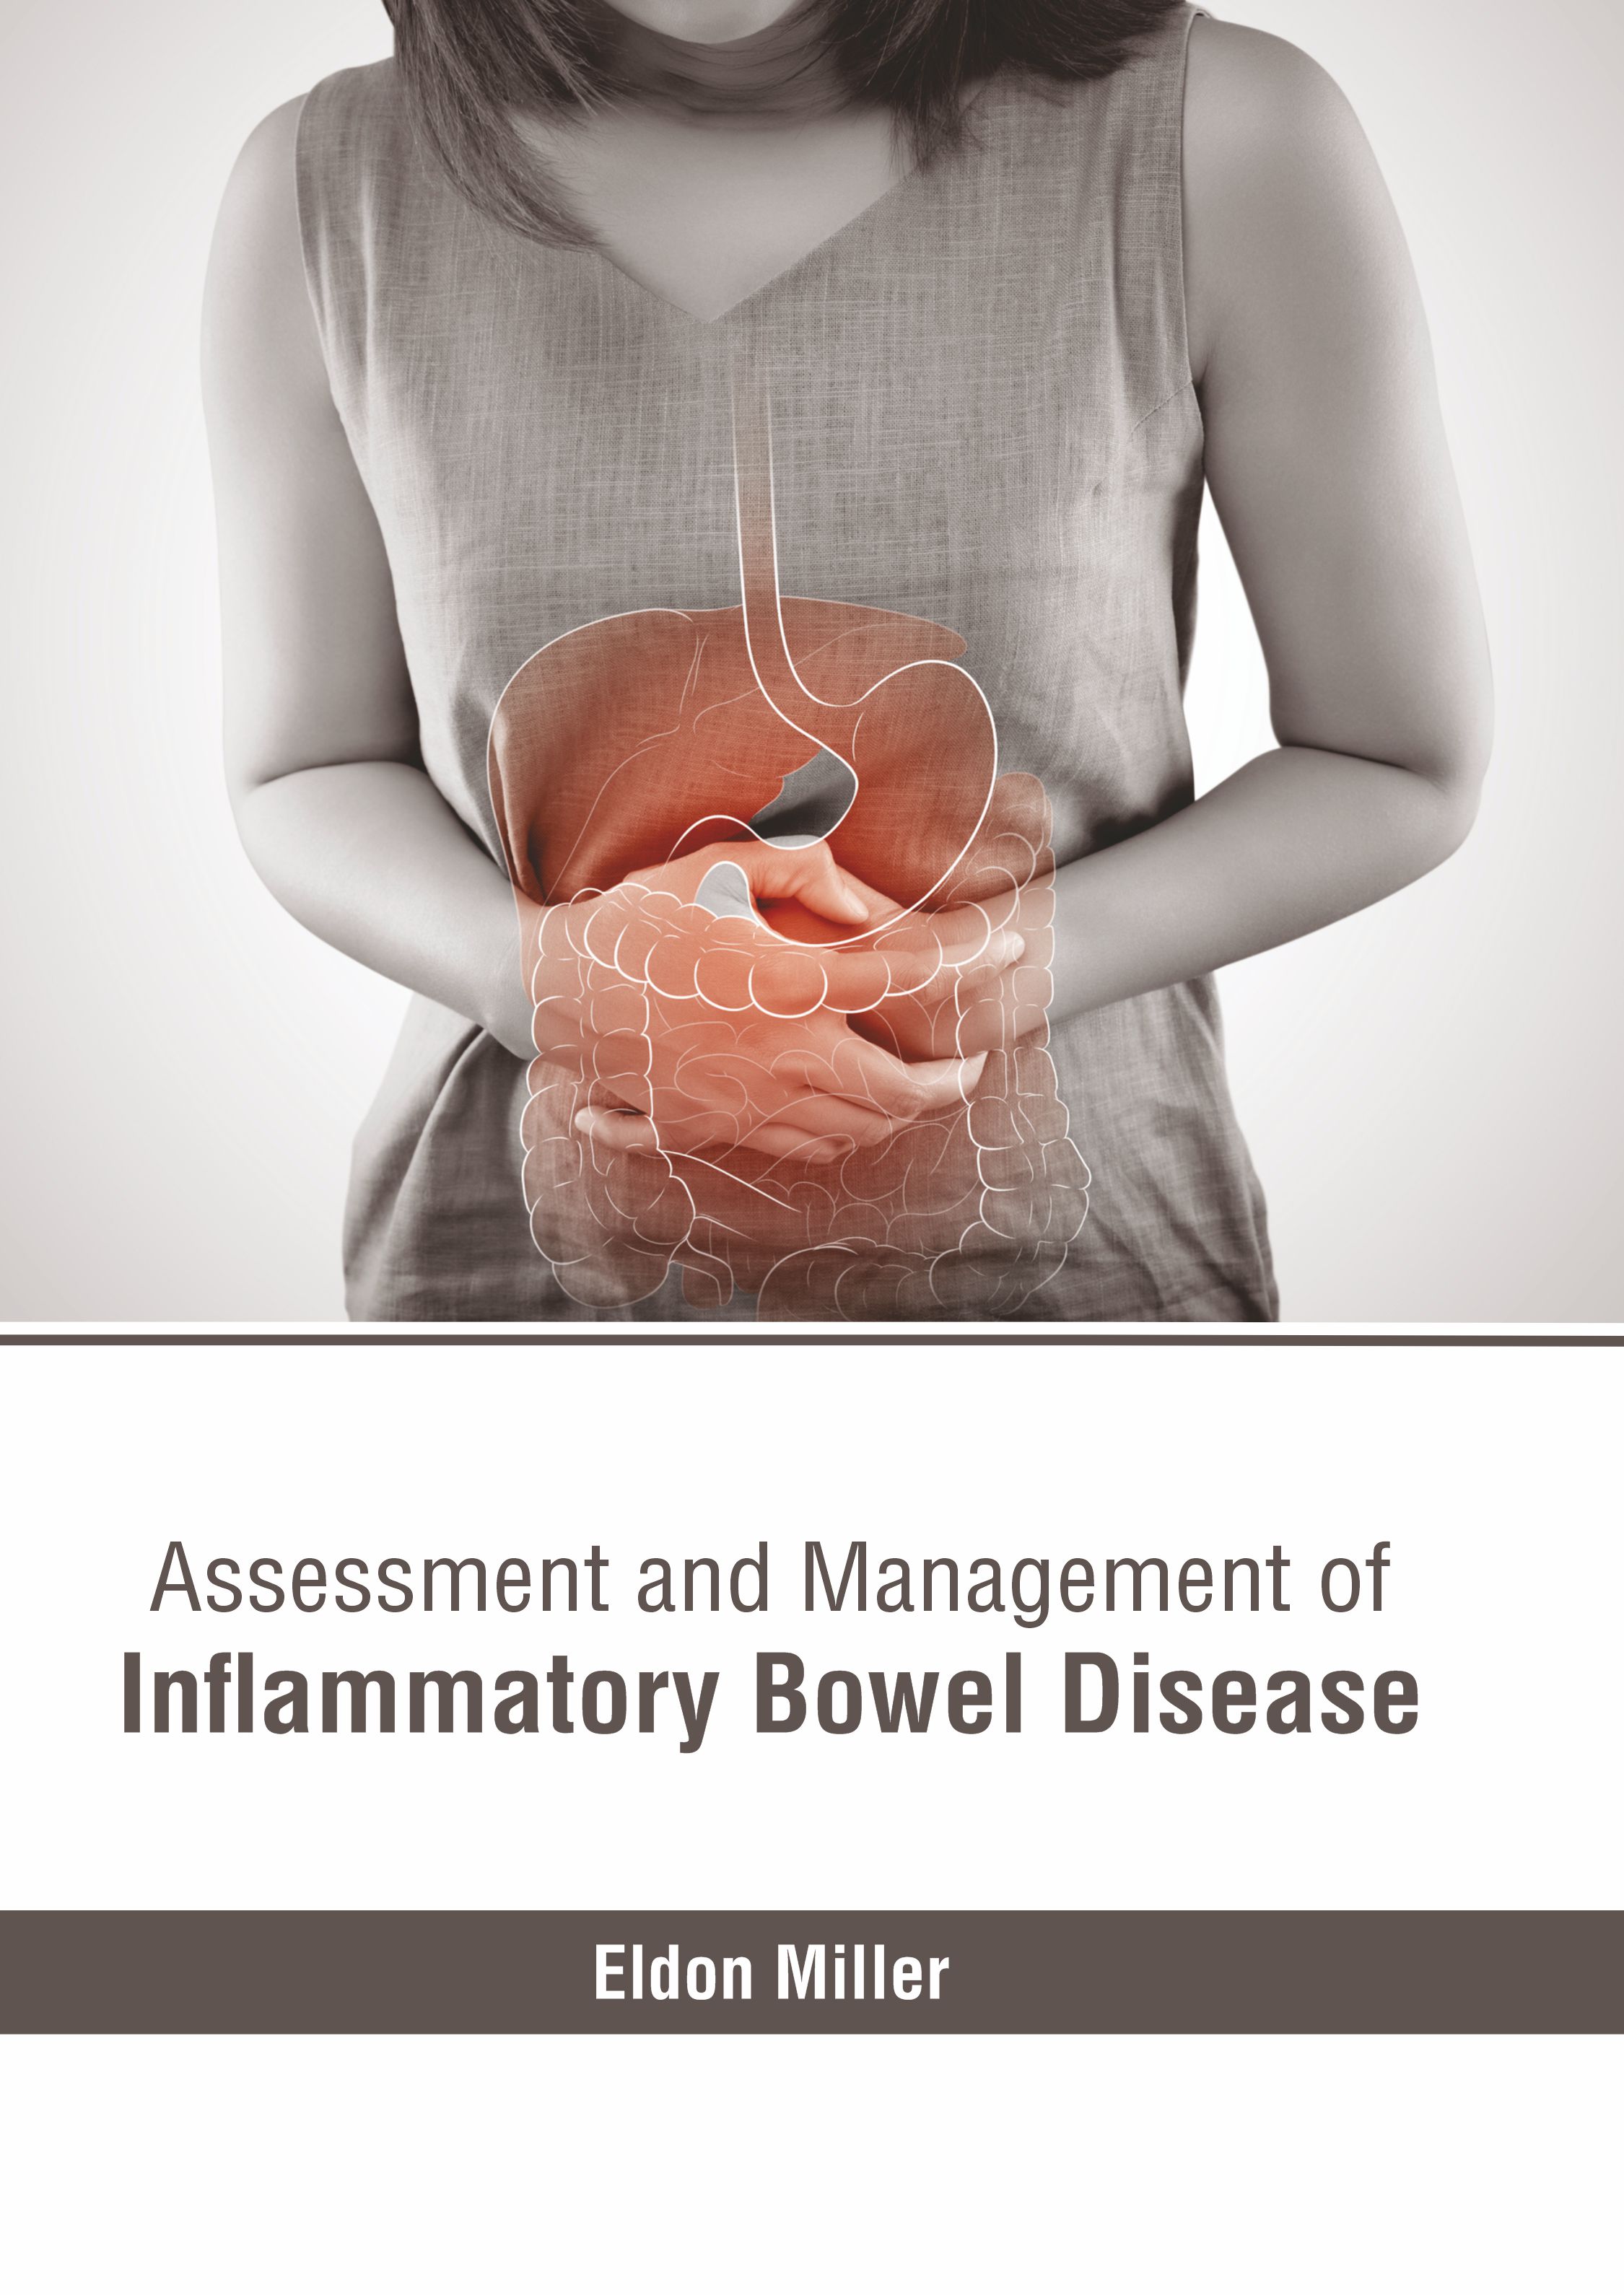 ASSESSMENT AND MANAGEMENT OF INFLAMMATORY BOWEL DISEASE